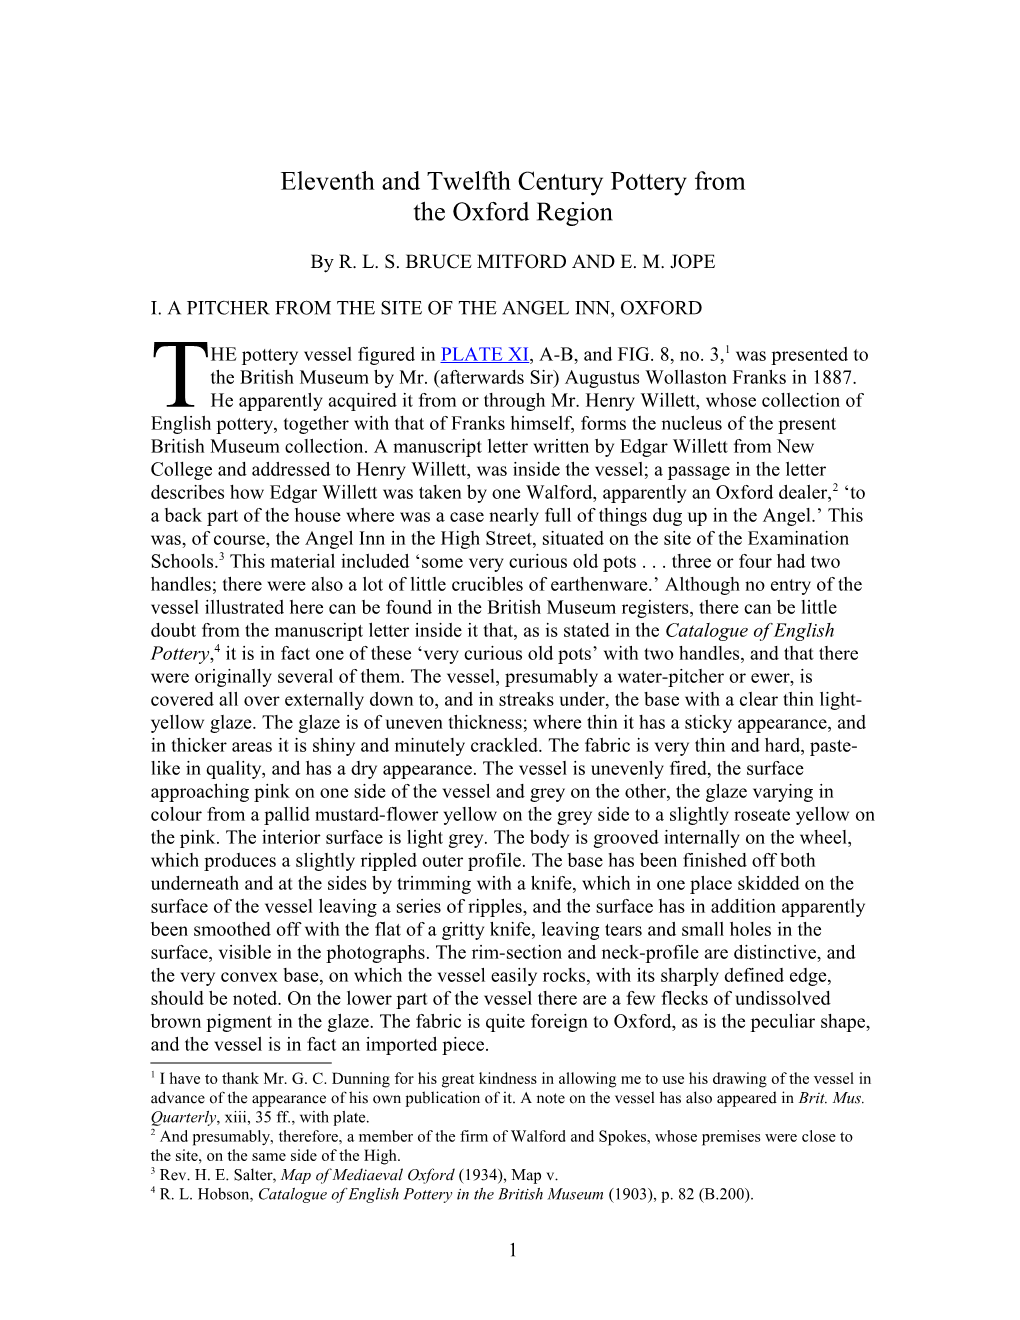 Eleventh and Twelfth Century Pottery from the Oxford Region